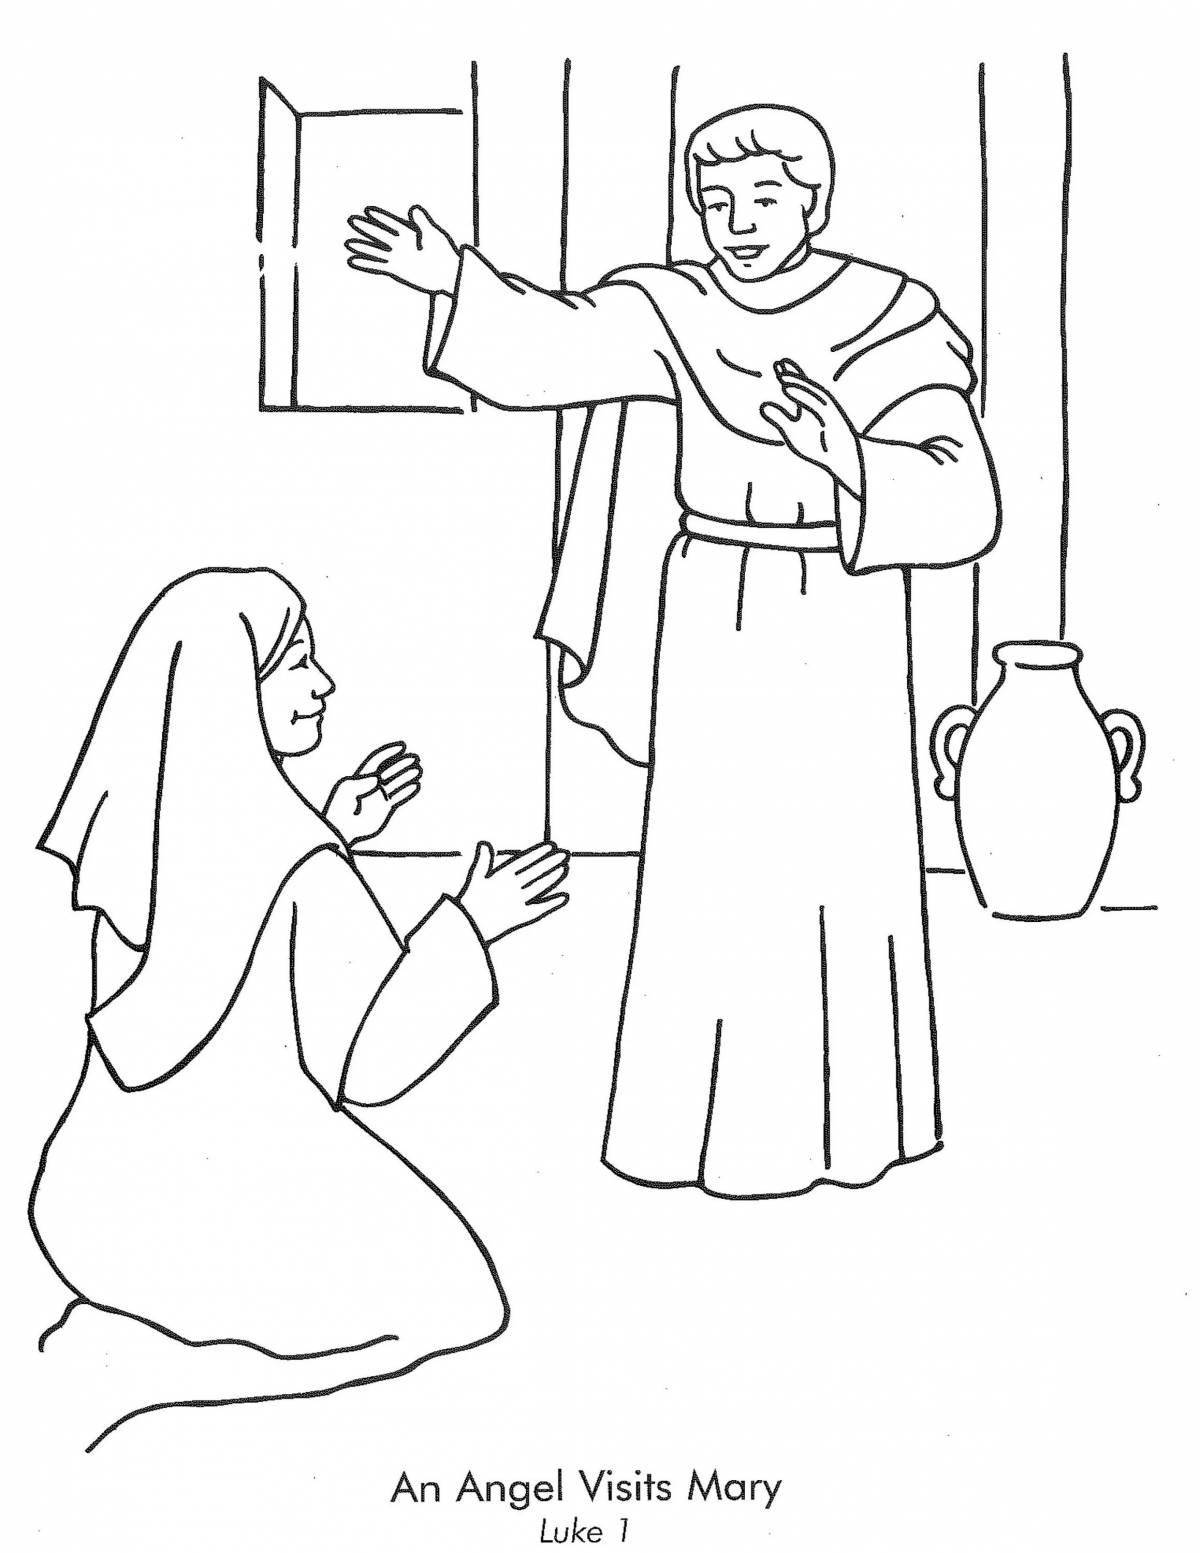 Coloring book merry publican and Pharisee